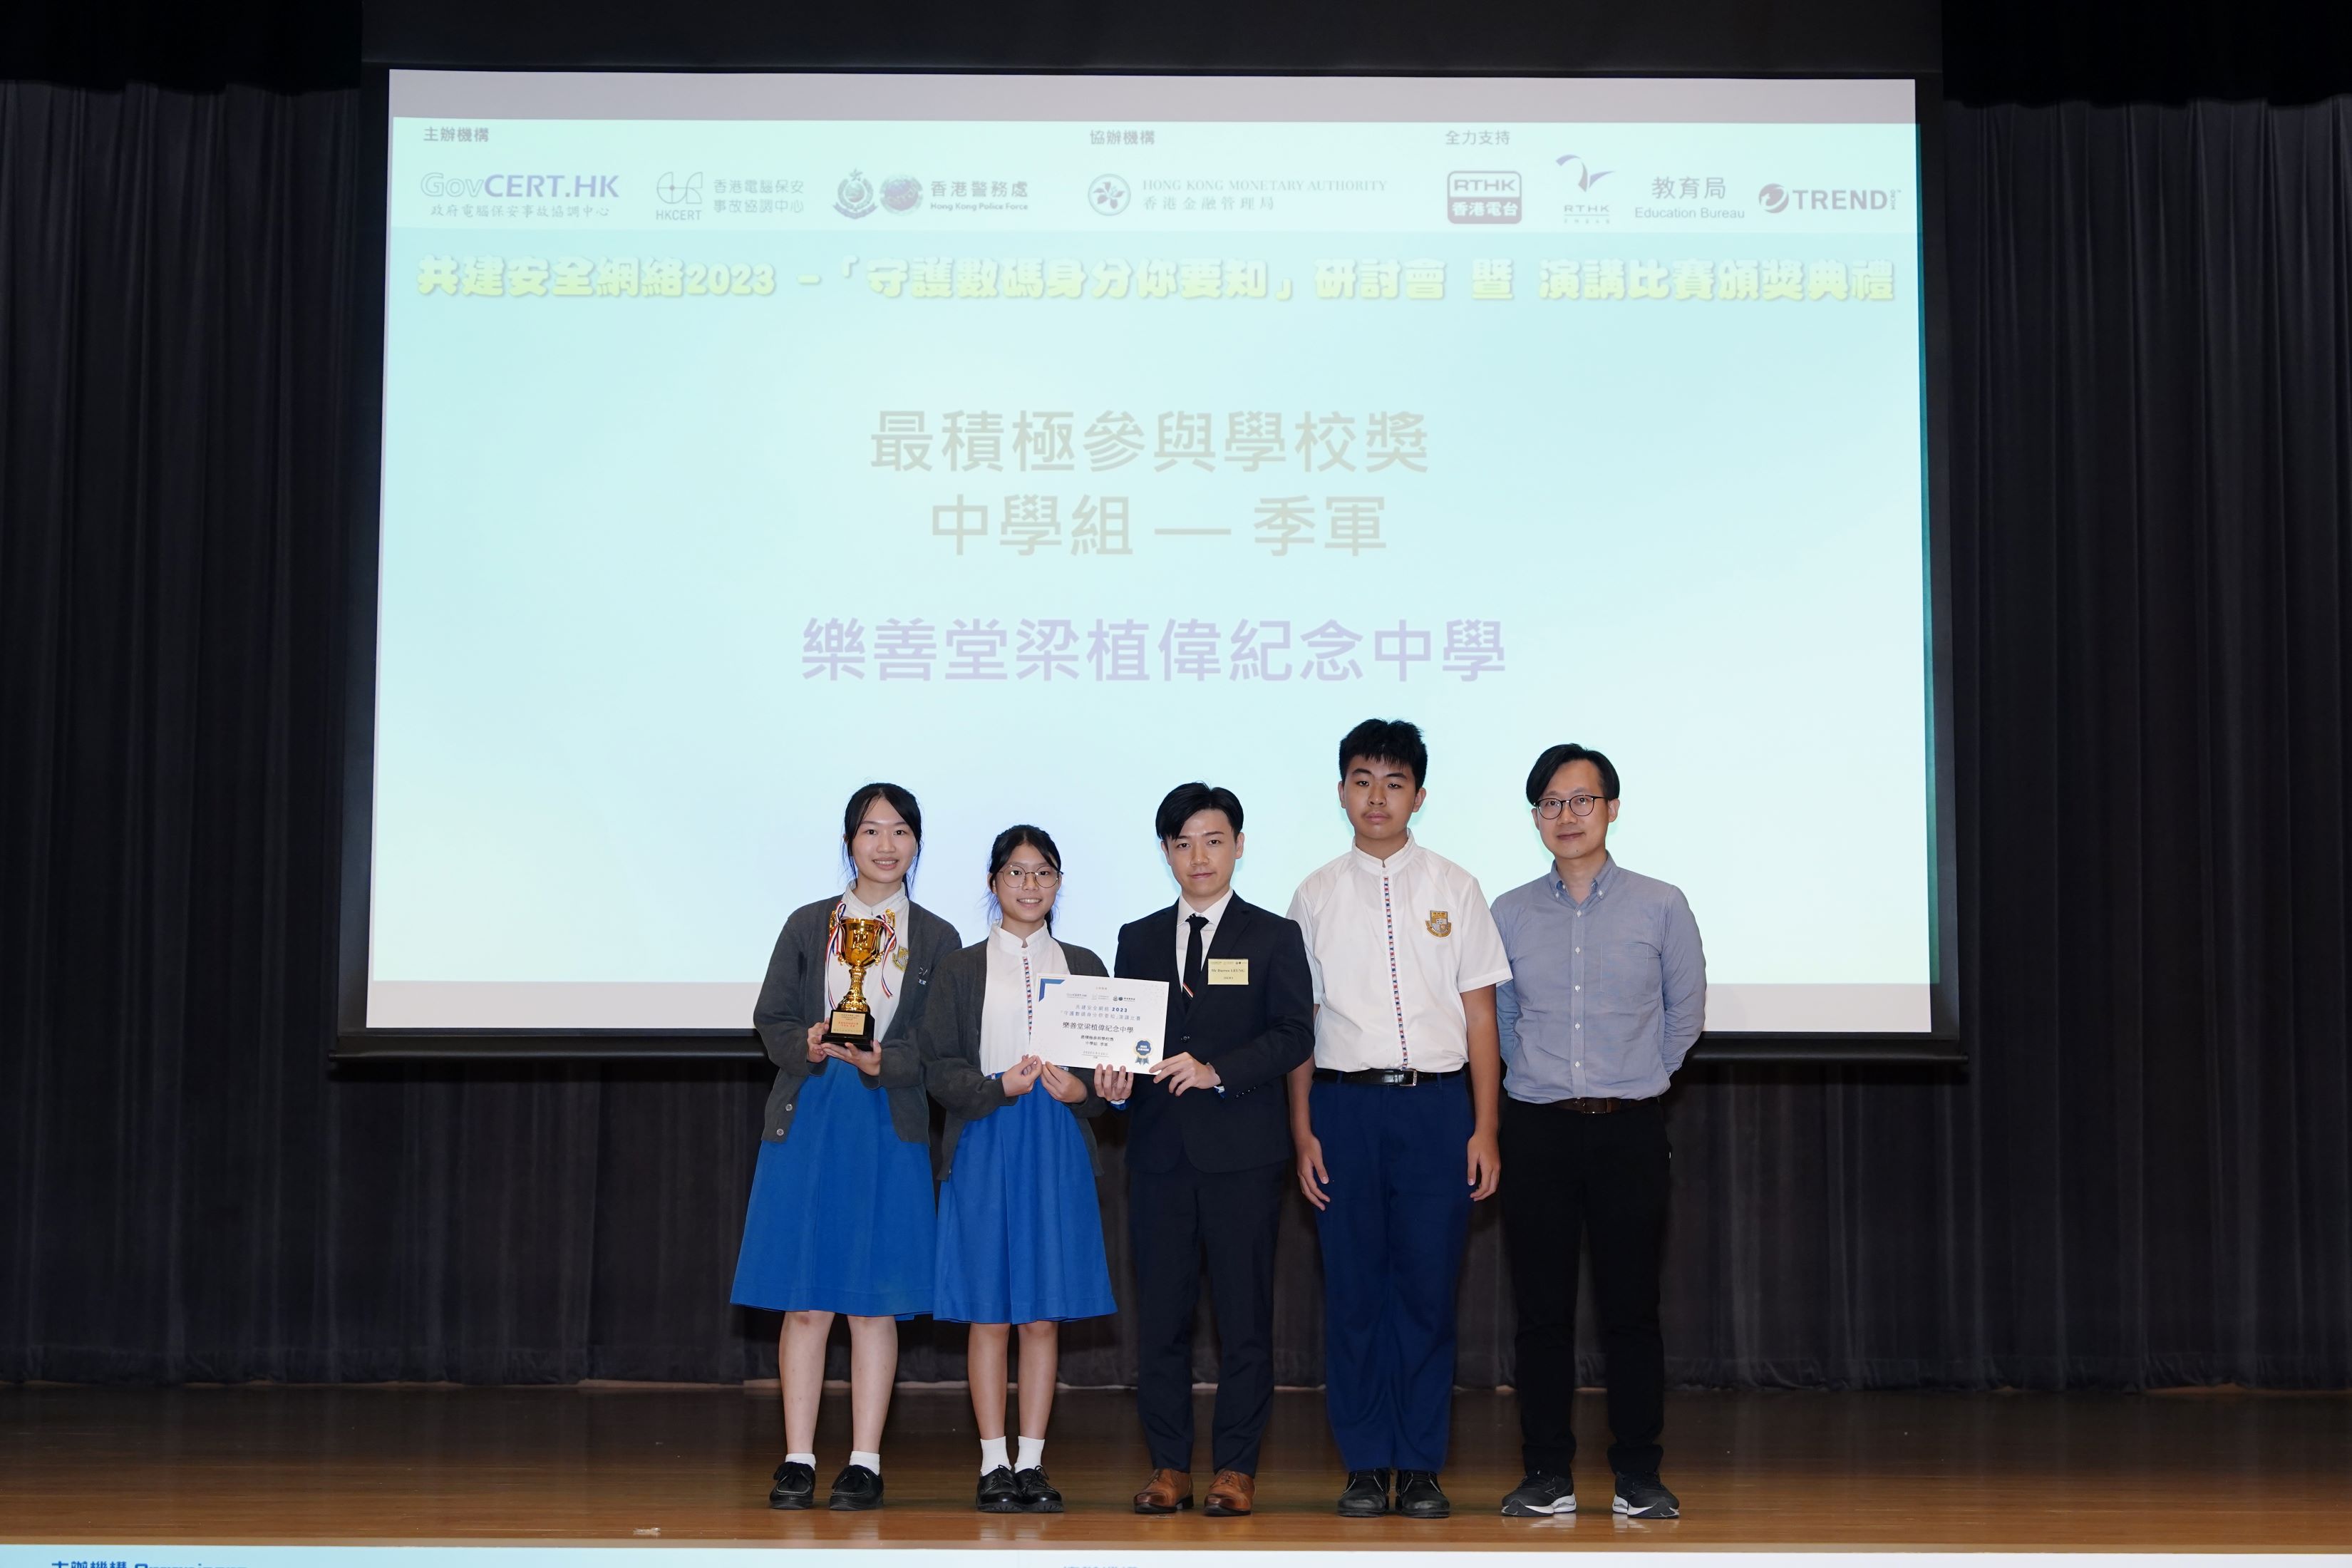 2nd Runner-up of Most Supportive School Award (Secondary School Category) - Lok Sin Tong Leung Chik Wai Memorial School